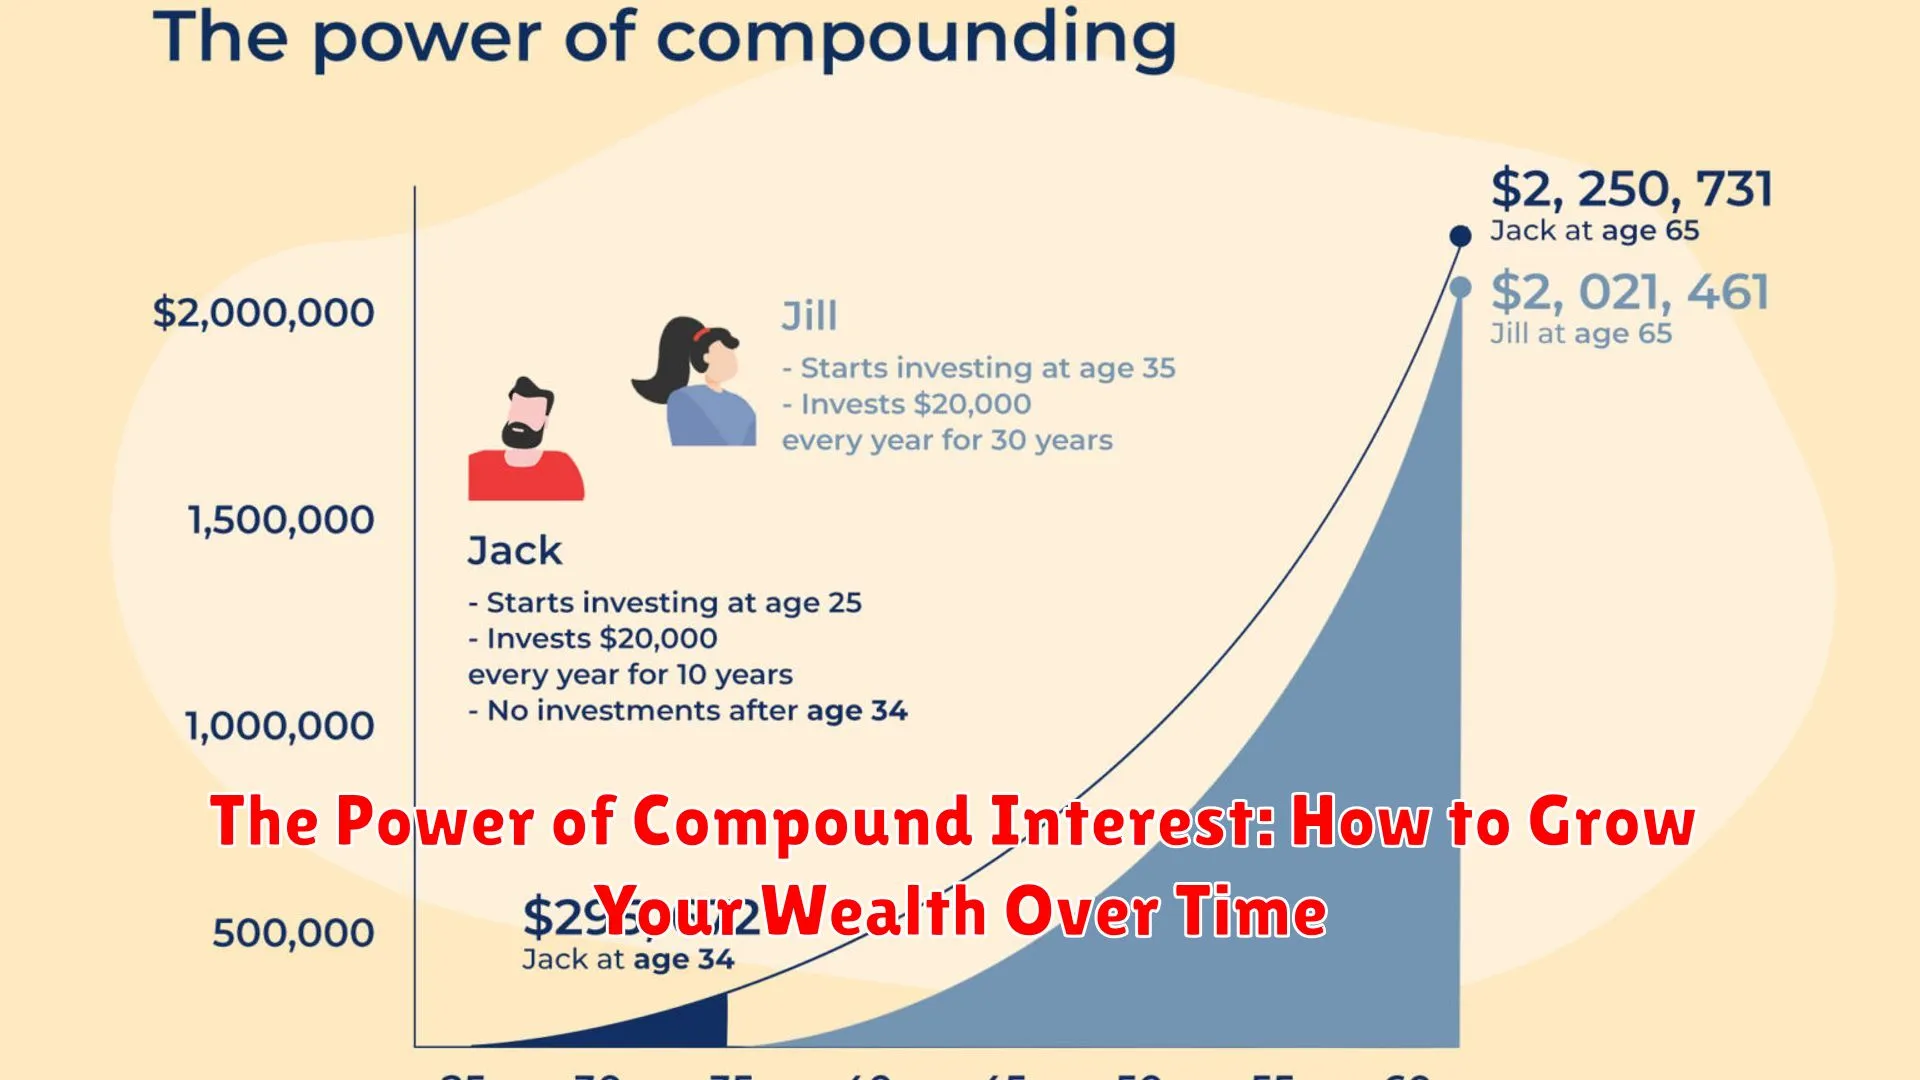 The Power of Compound Interest: How to Grow Your Wealth Over Time